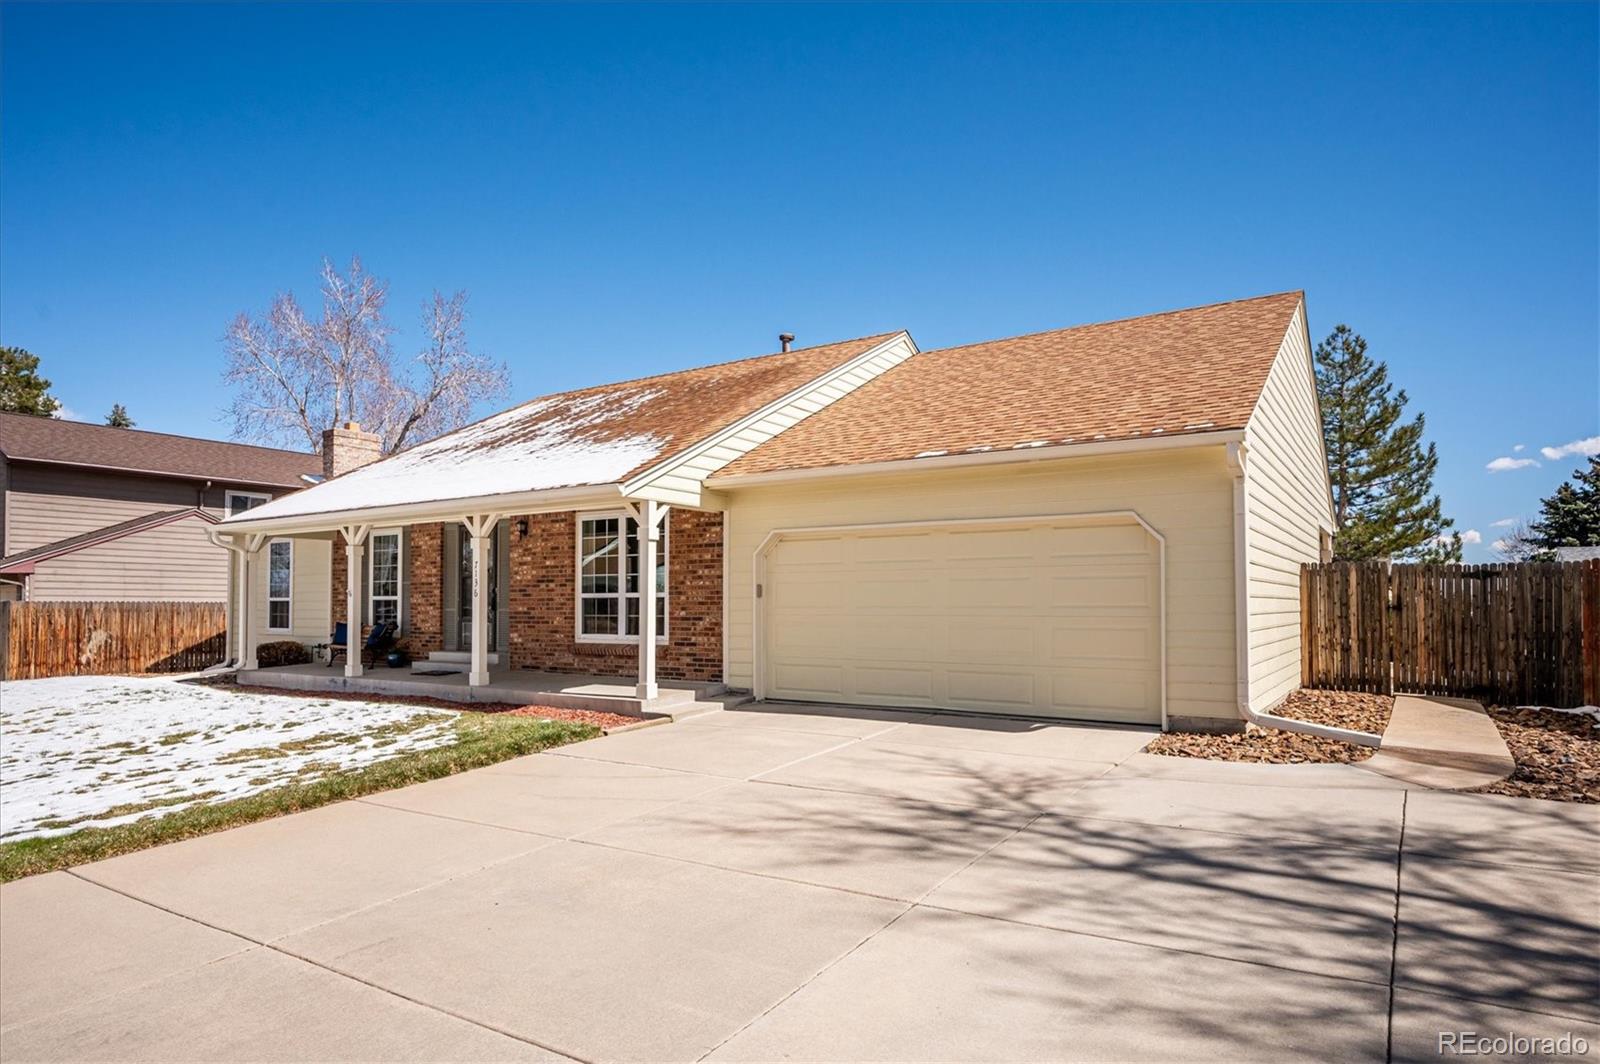 7136 s kline way, Littleton sold home. Closed on 2024-04-26 for $629,900.